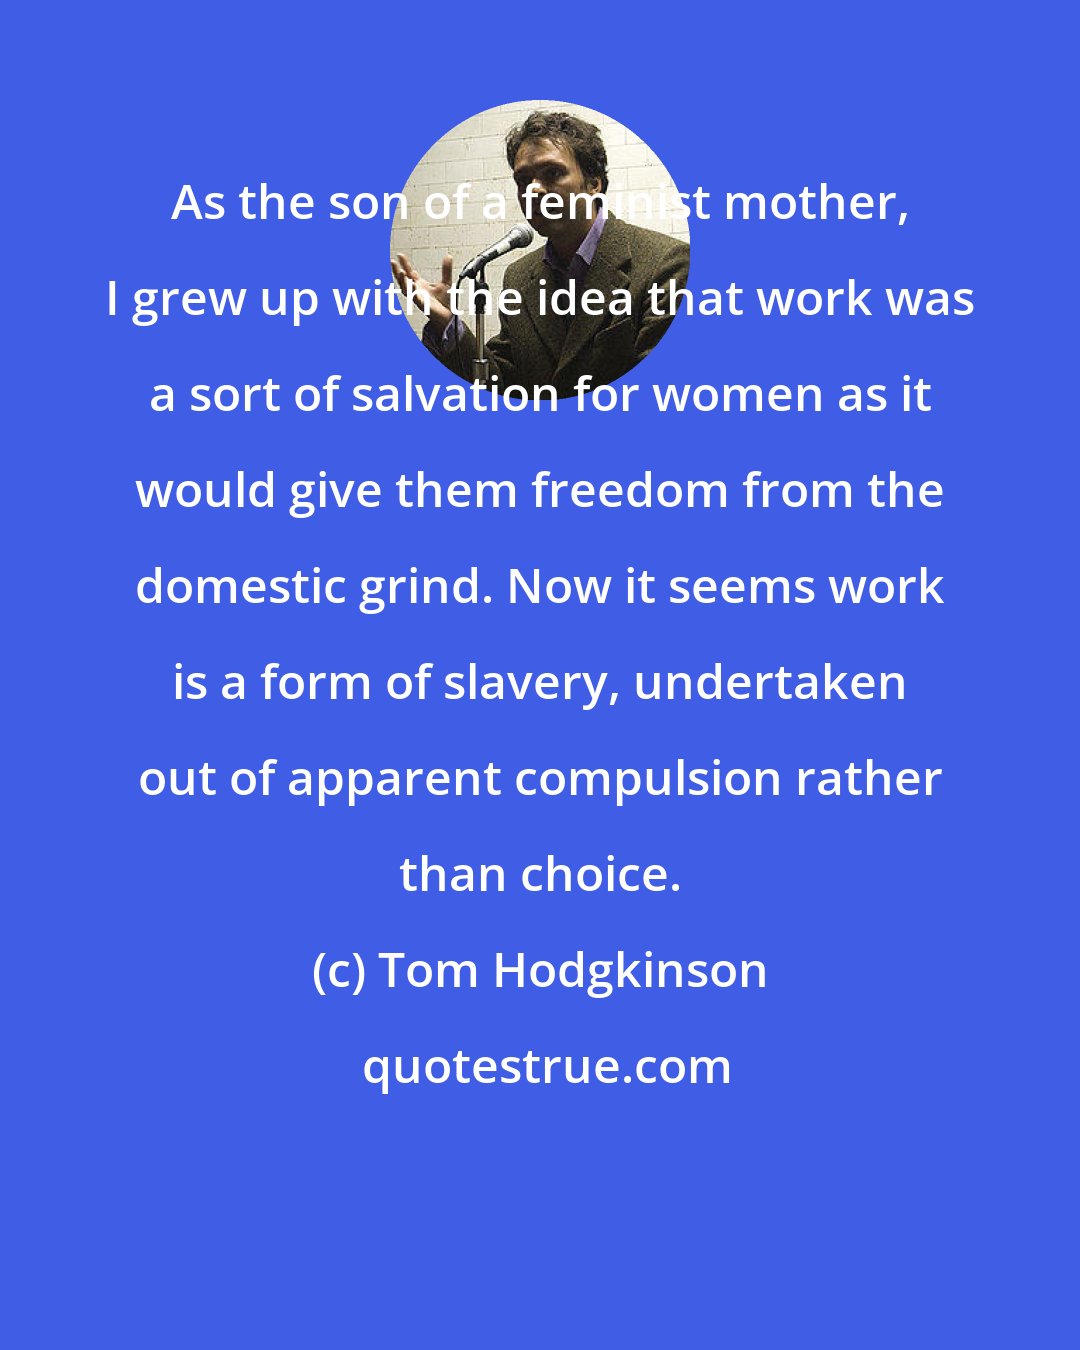 Tom Hodgkinson: As the son of a feminist mother, I grew up with the idea that work was a sort of salvation for women as it would give them freedom from the domestic grind. Now it seems work is a form of slavery, undertaken out of apparent compulsion rather than choice.